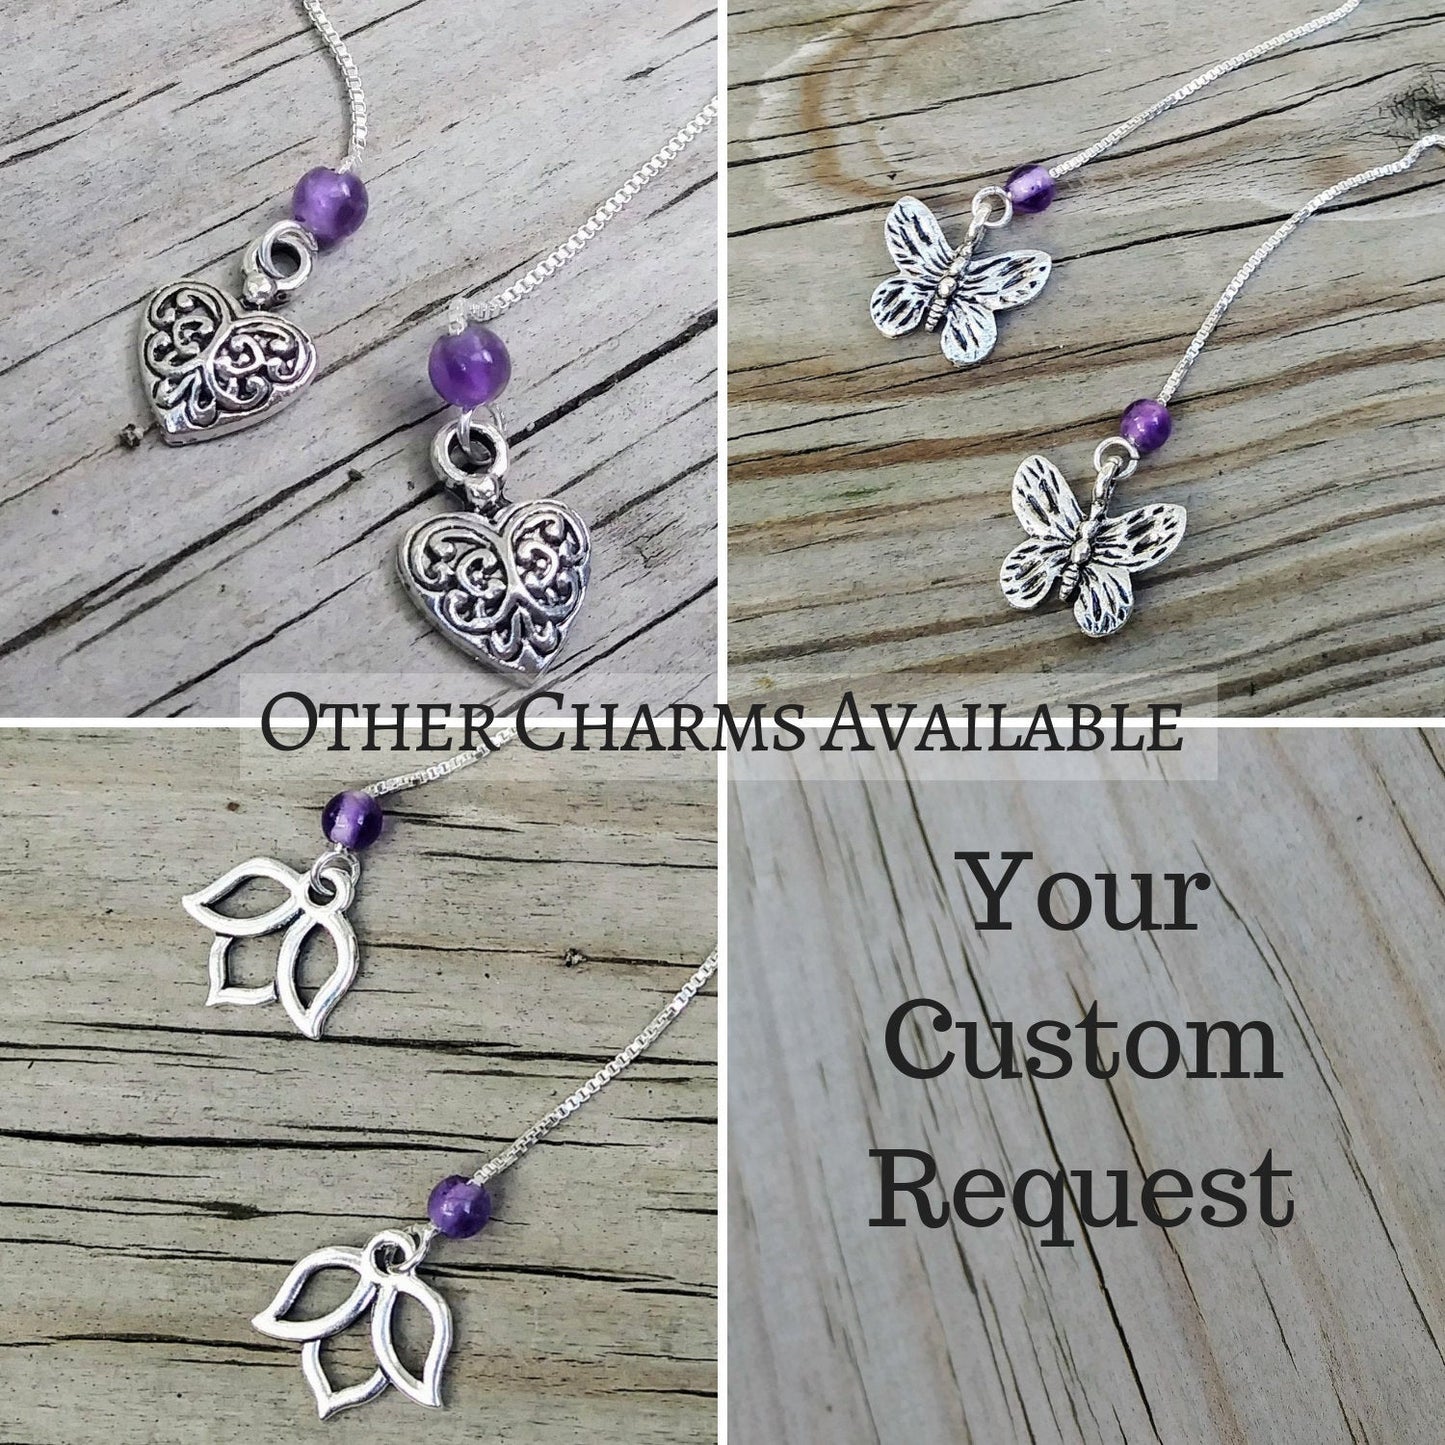 Heart Charm Threader Earrings with Chakra Gemstone Set - 4 inch 0.925 Sterling Silver Threads